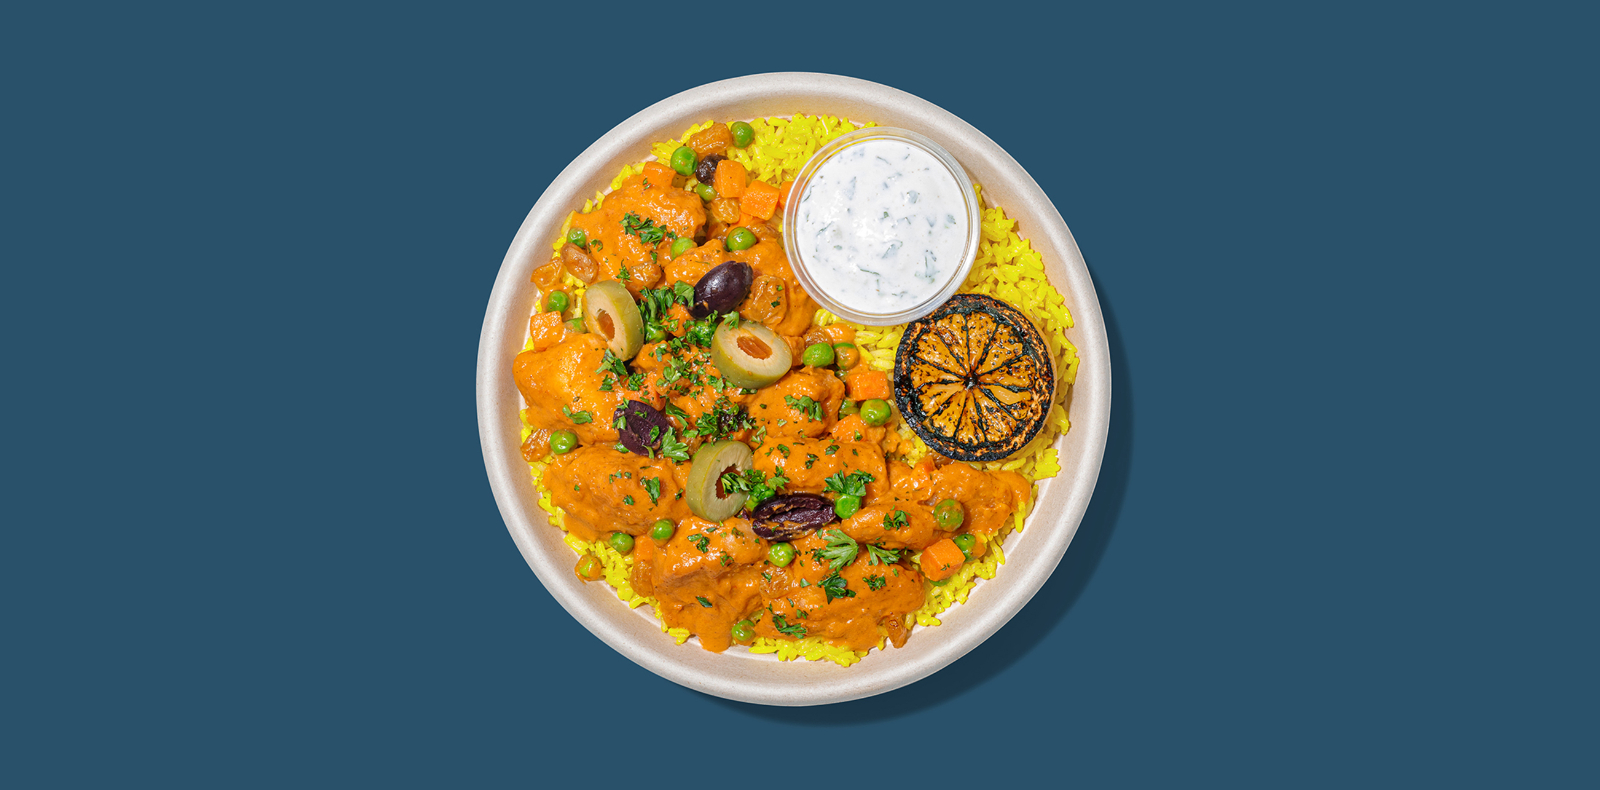 New Roadtrip Bowl called Curry Chicken served with Crispy chicken, spicy harissa curry, peas, carrots, raisins + olives, yellow rice, cooling cucumber sauce  alt tag